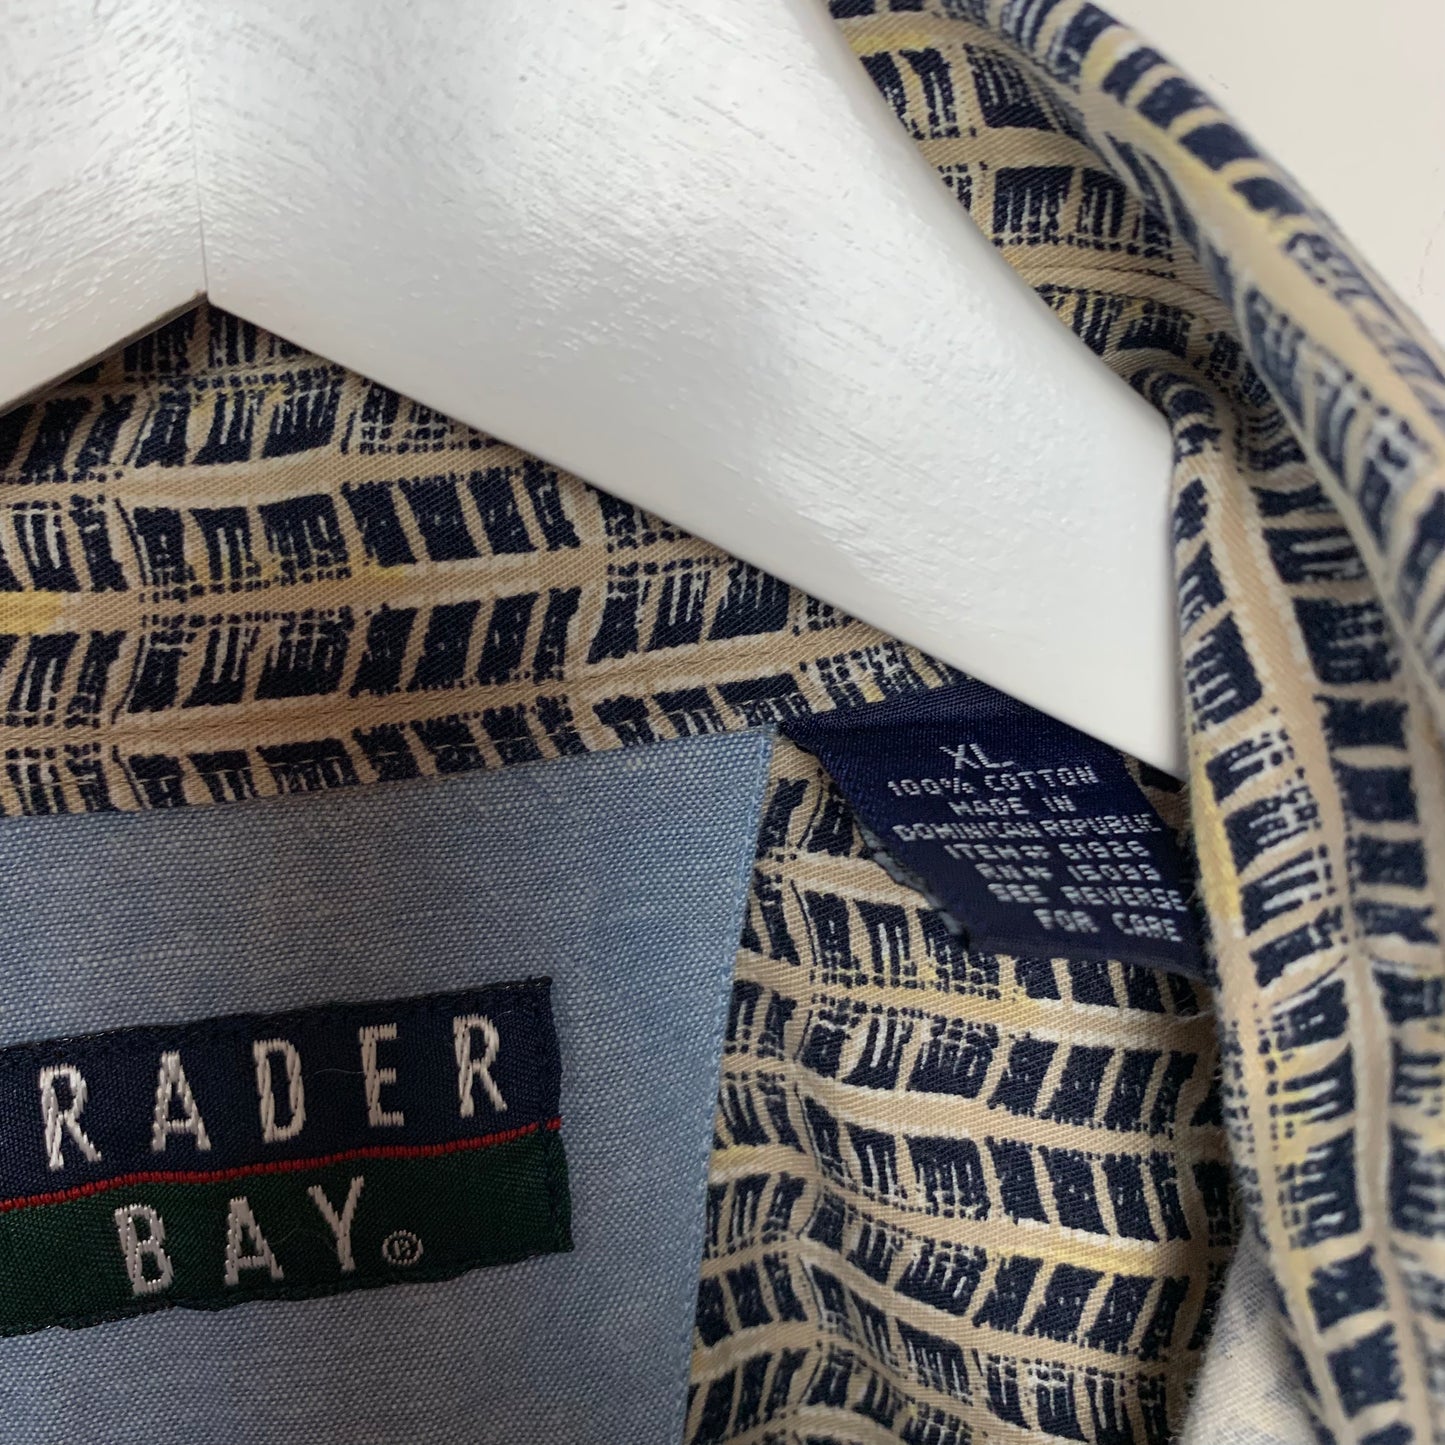 Vintage 90s Trader Bay Long Sleeve Button Down Collared Shirt Patterned XL Cotton